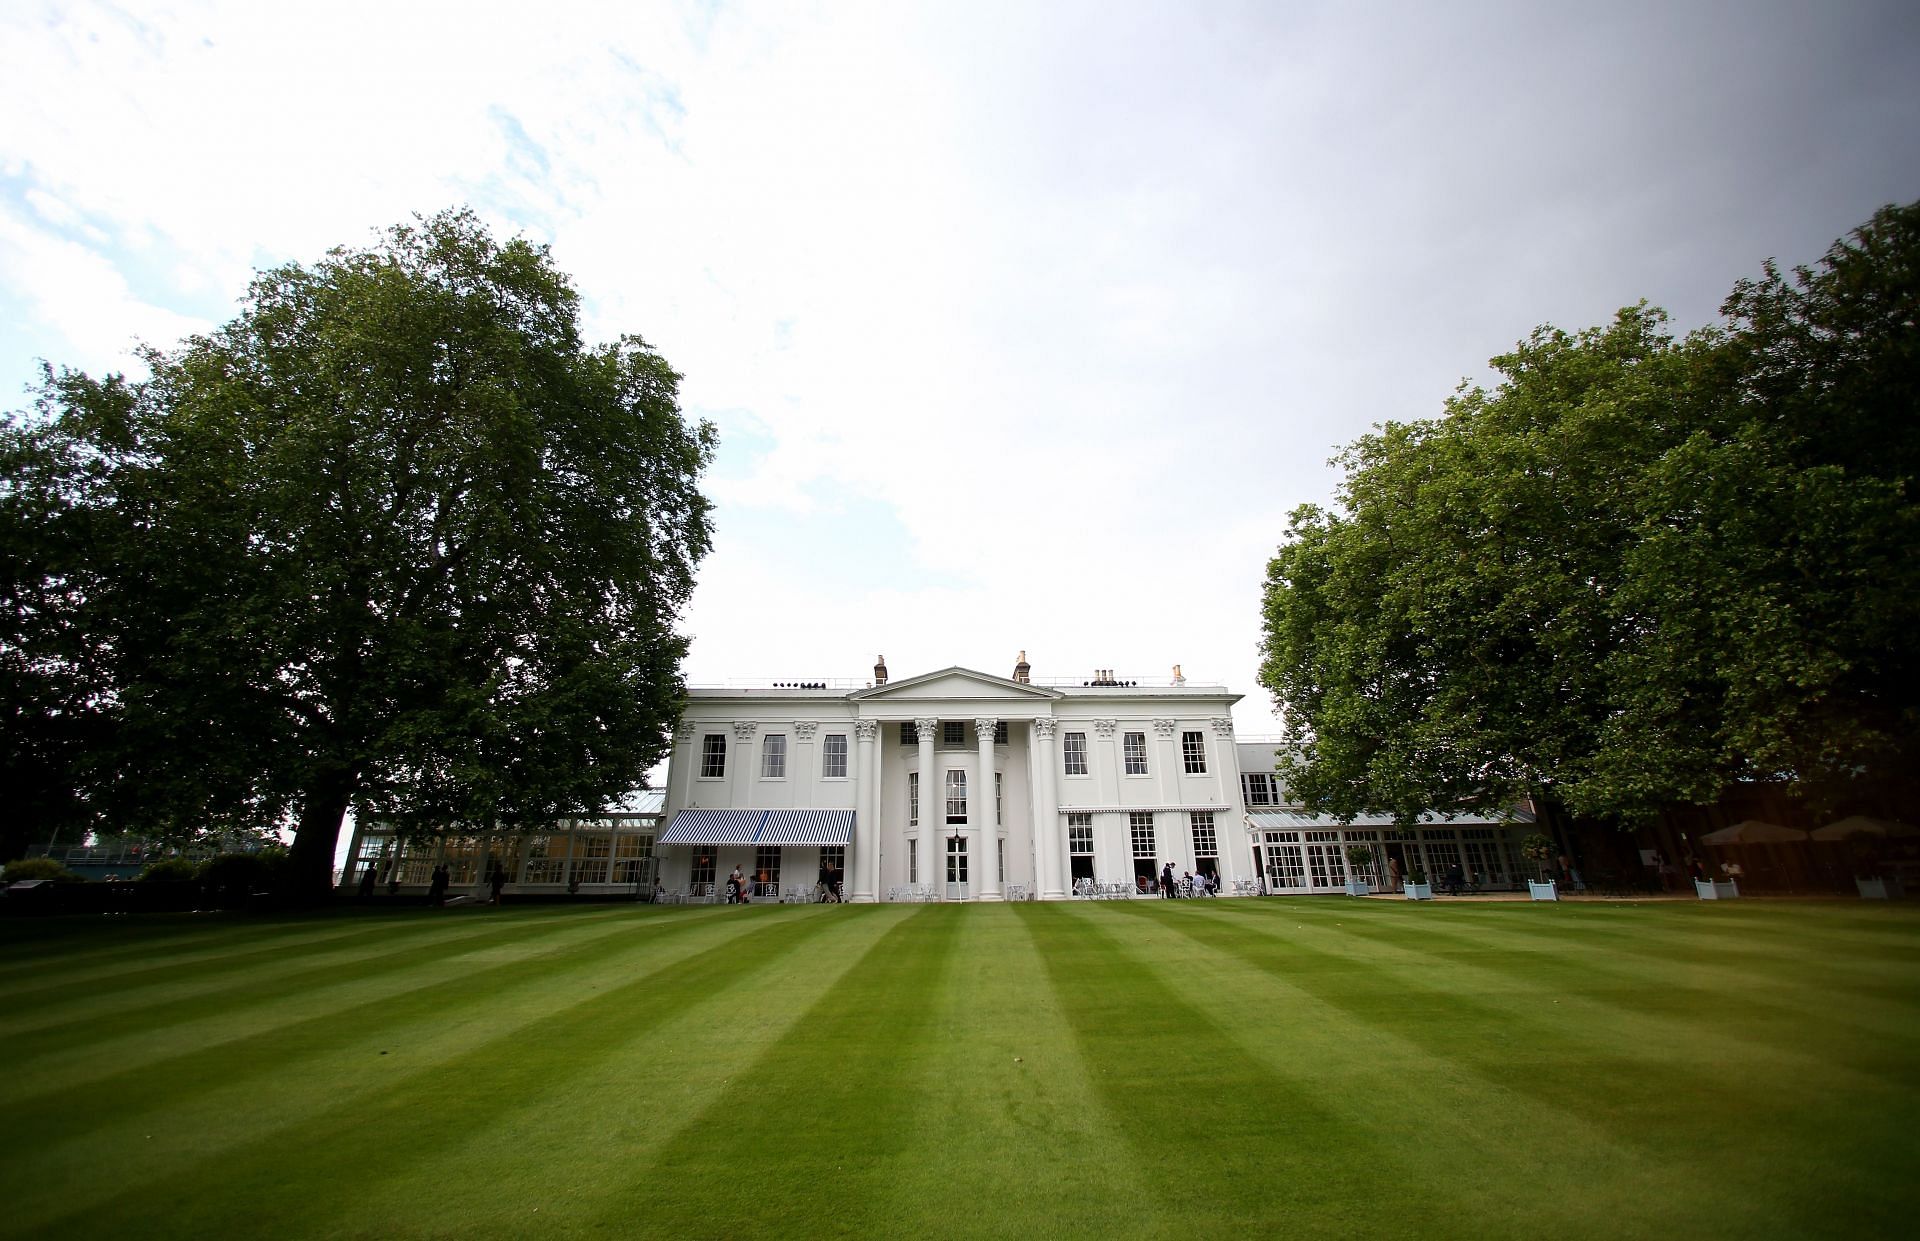 A general view of the Hurlingham Club